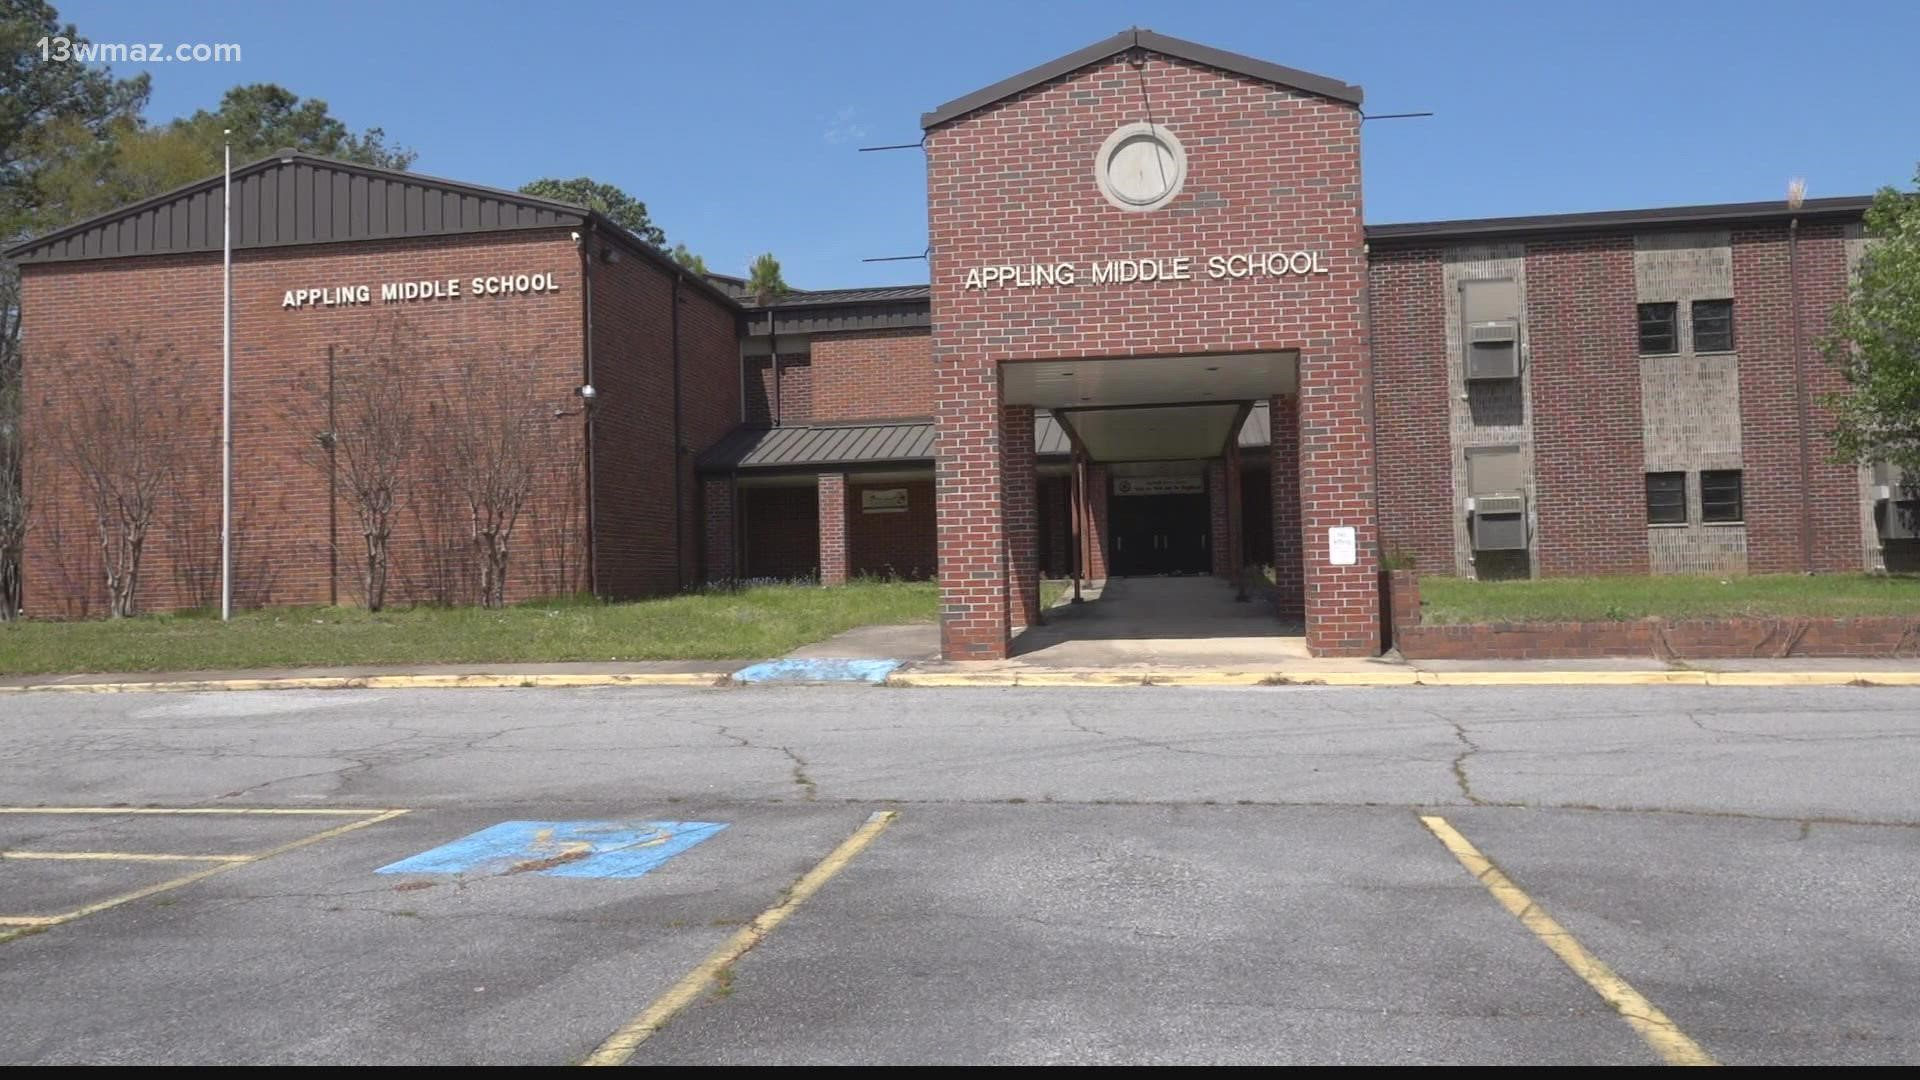 The committee to save Appling Middle School is currently looking for the community's support in trying to find a new purpose for the middle school.